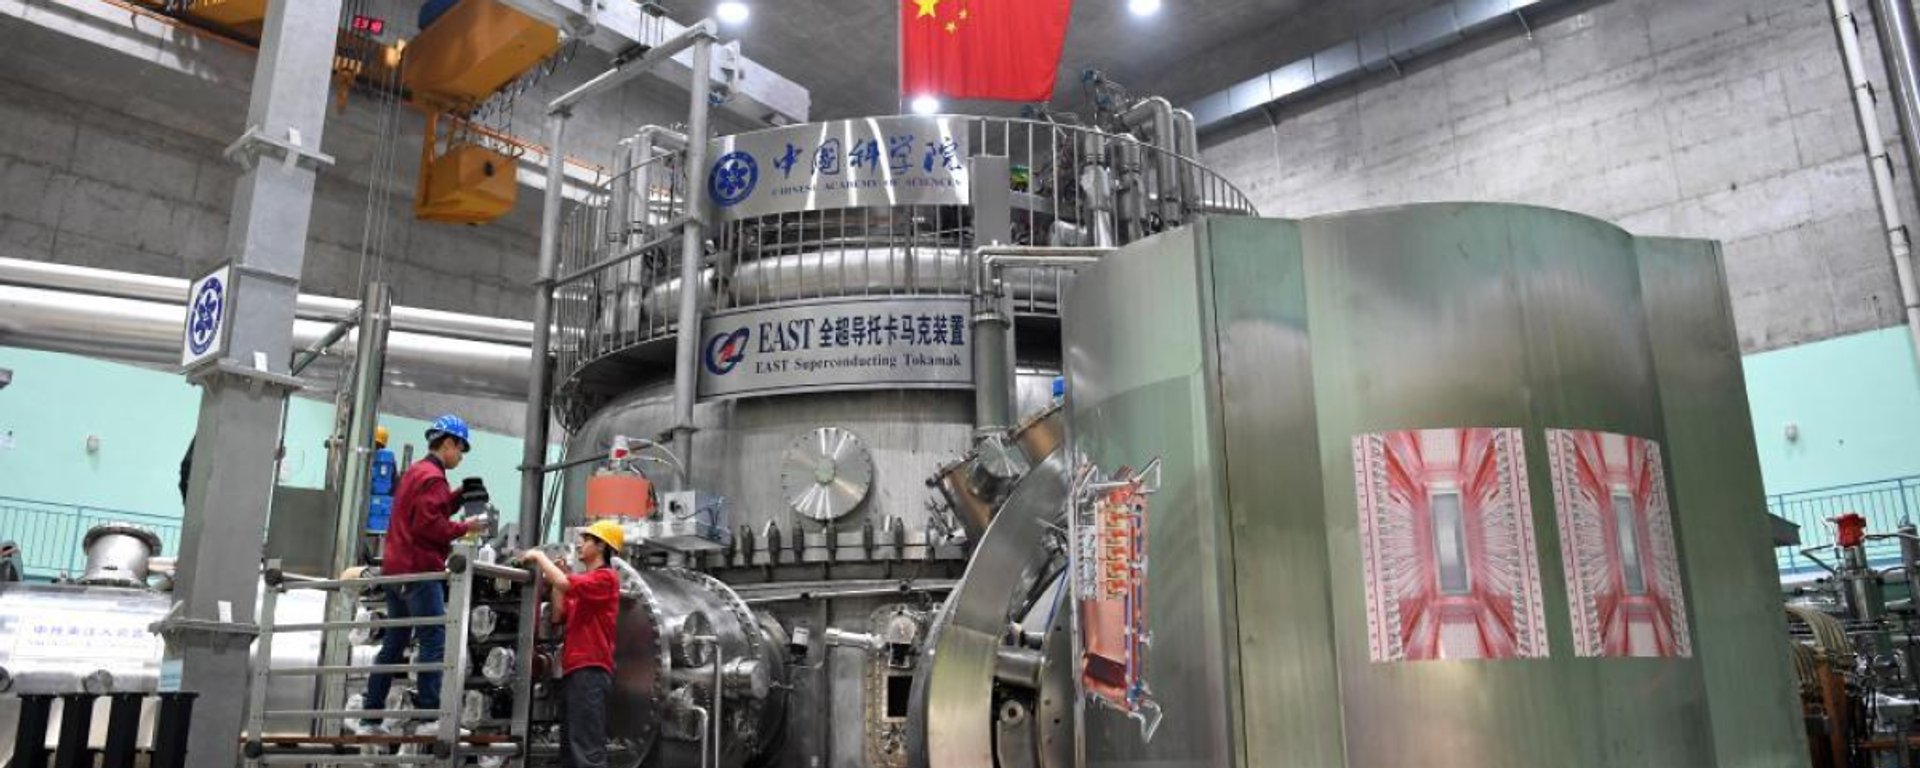 The Experimental Advanced Superconducting Tokamak (EAST) at the Hefei Institutes of Physical Science of the Chinese Academy of Sciences in China’s Anhui Province, seen on May 28, 2021. - Sputnik International, 1920, 28.05.2021